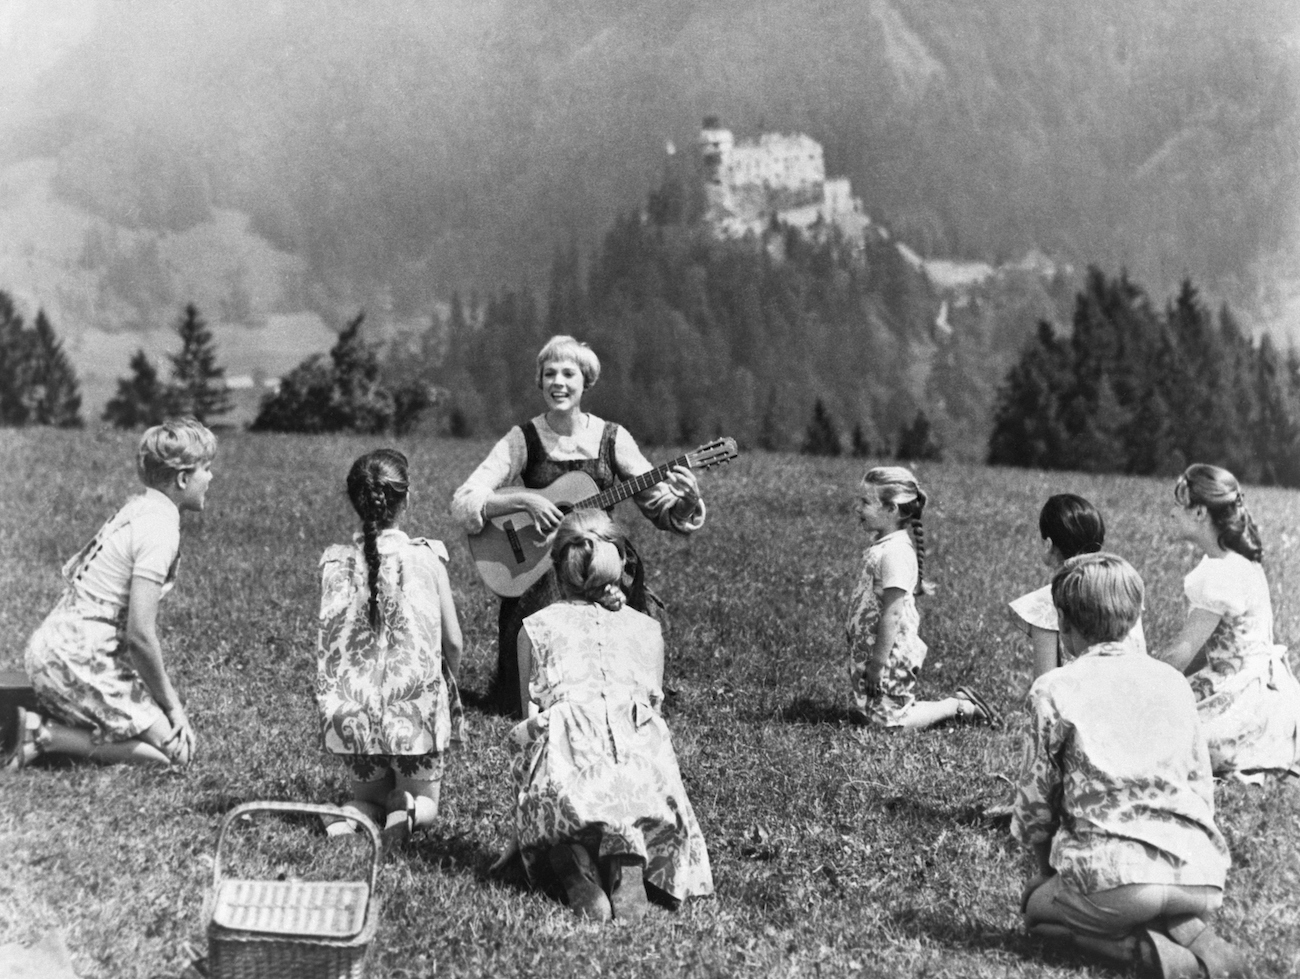 Sound of Music scene with Julie Andrews and children singing in a field